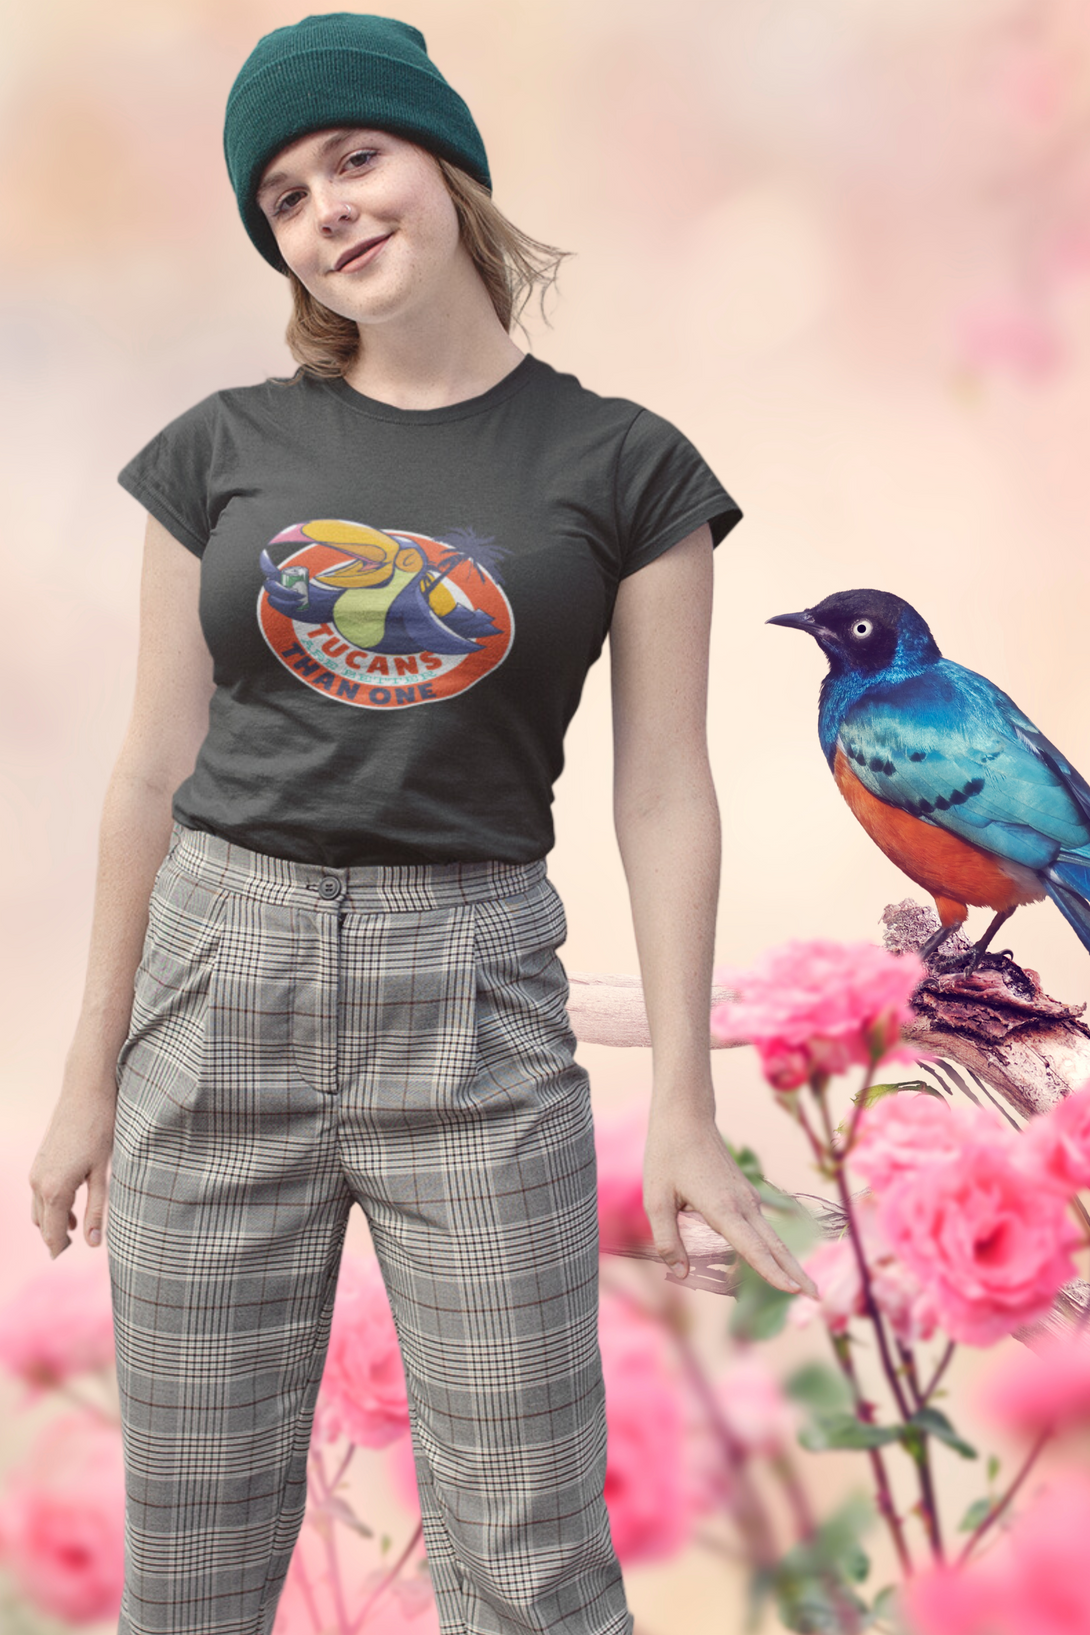 Tucans Are Better Tha One Printed T-Shirt For Women - WowWaves